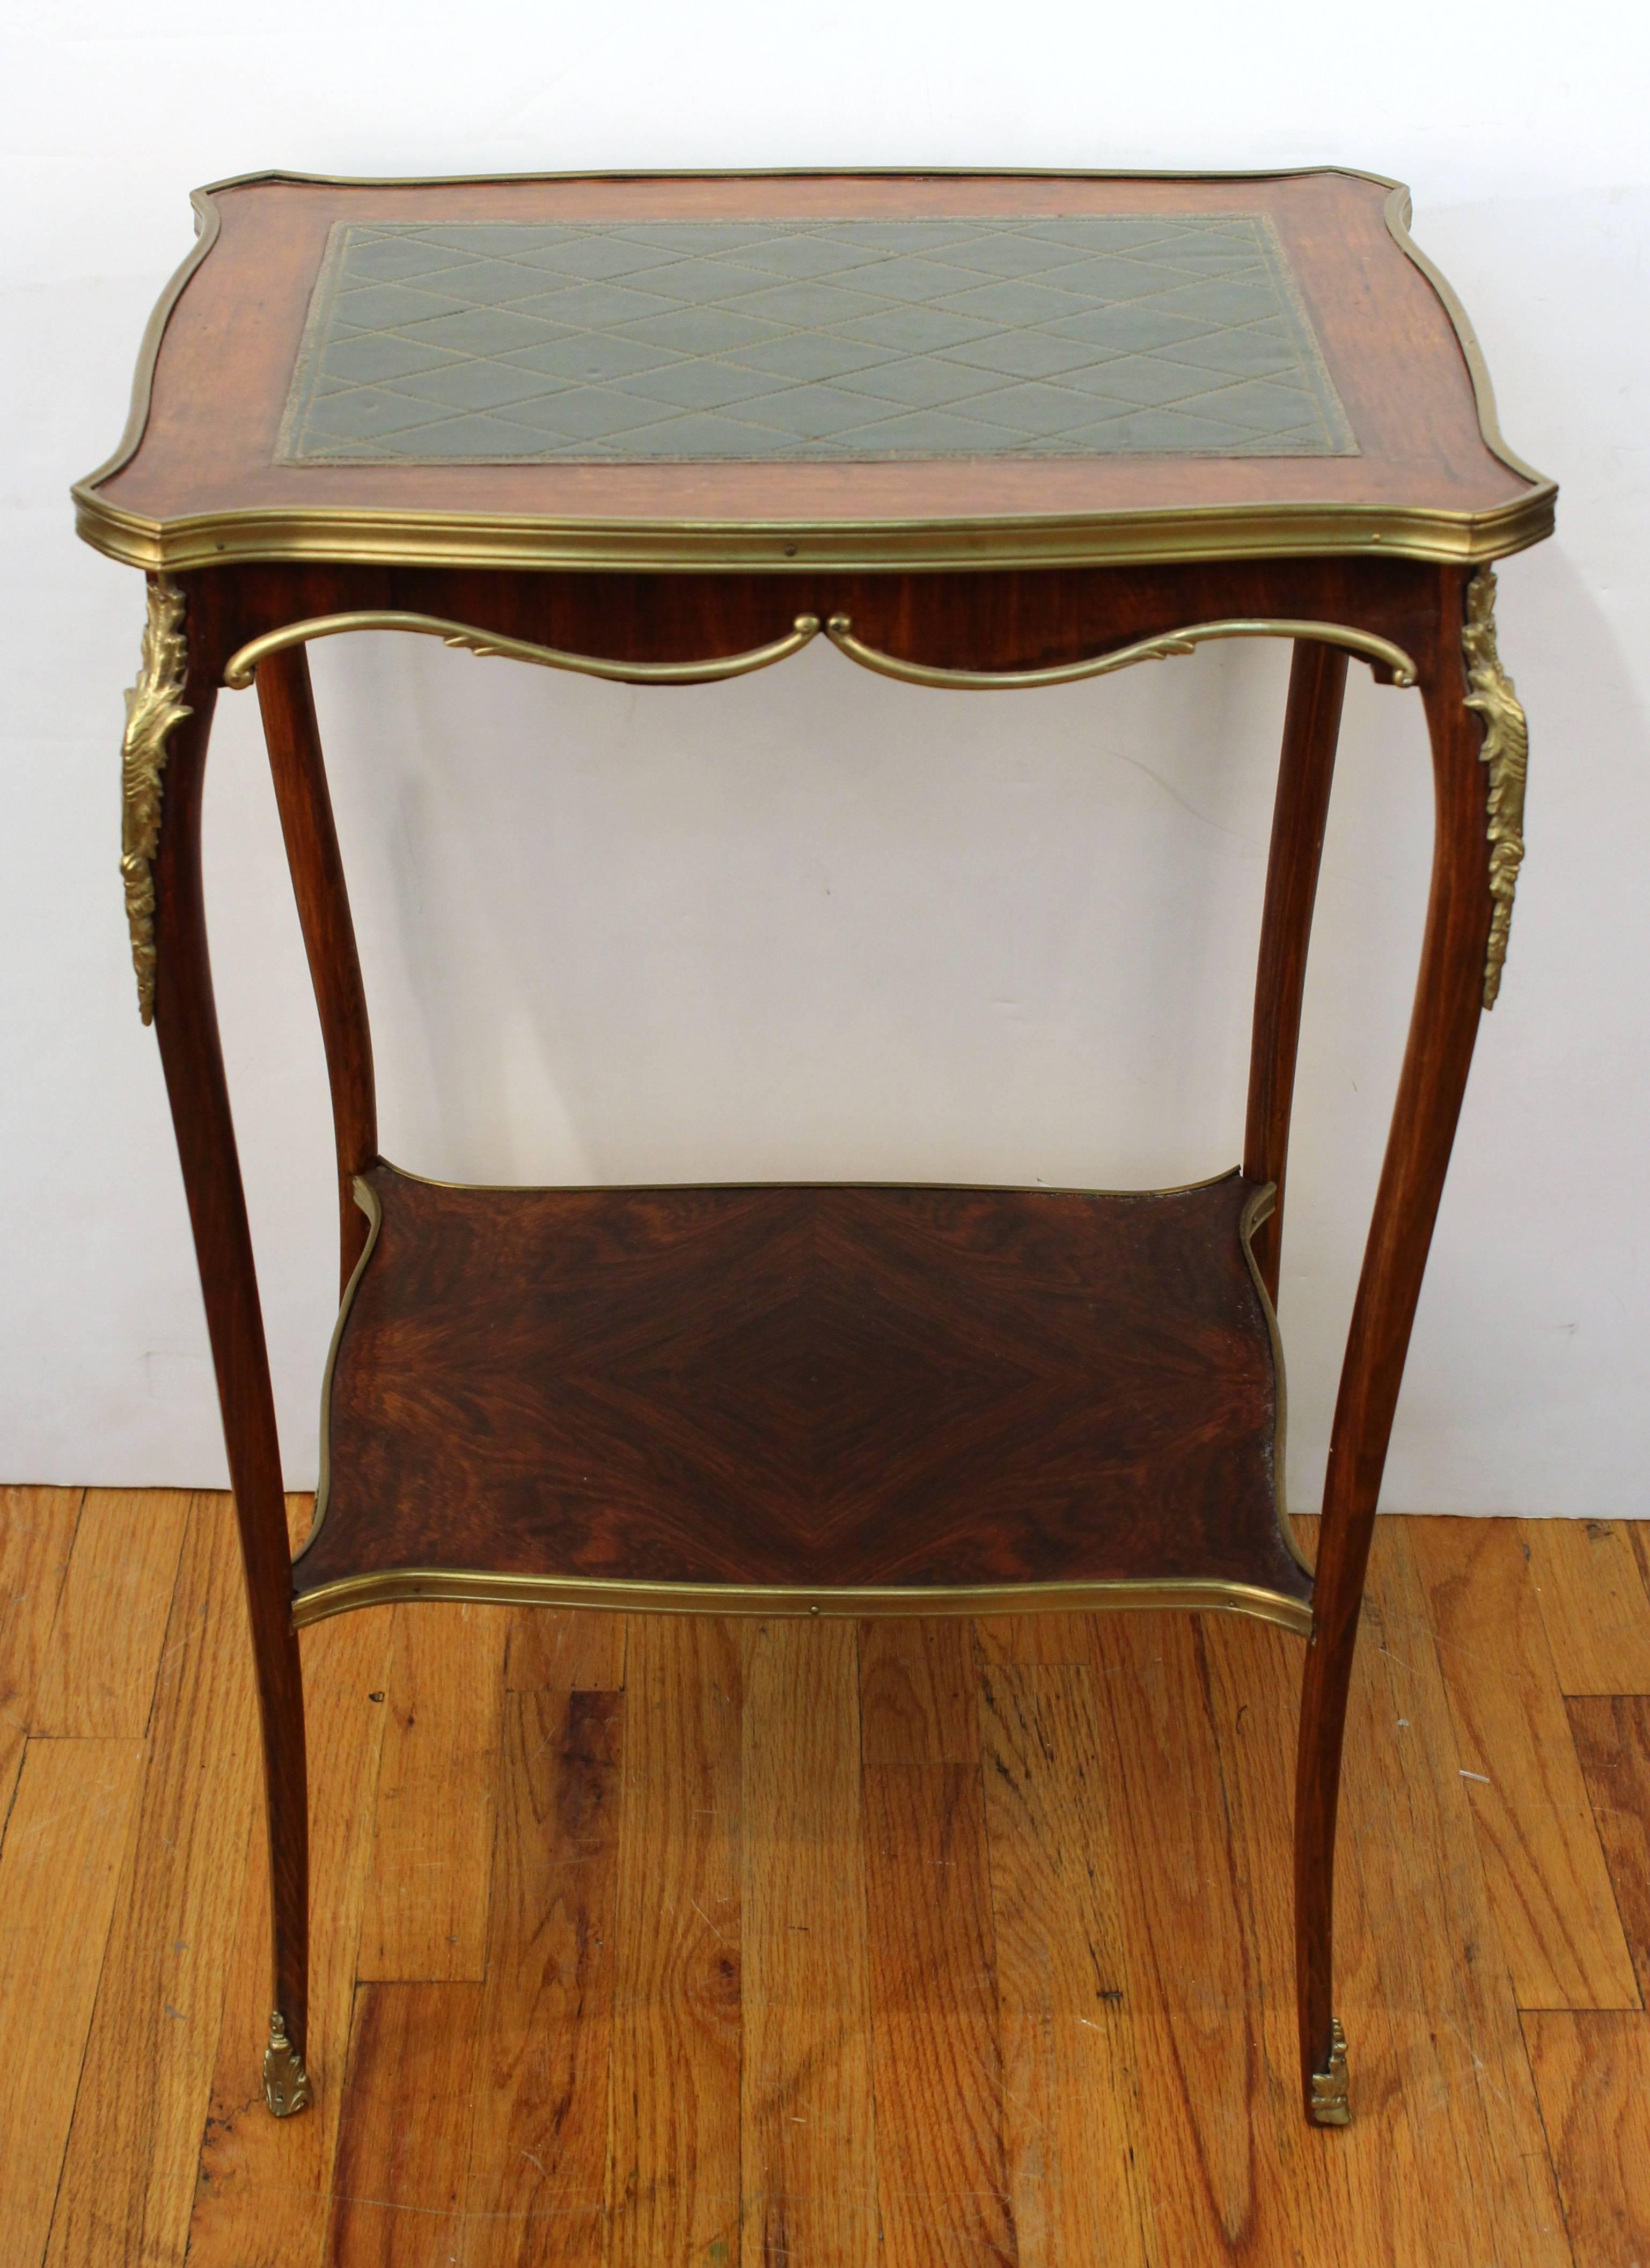 Brass 19th Century Wooden Side Table with Shelf and Green Leather Top